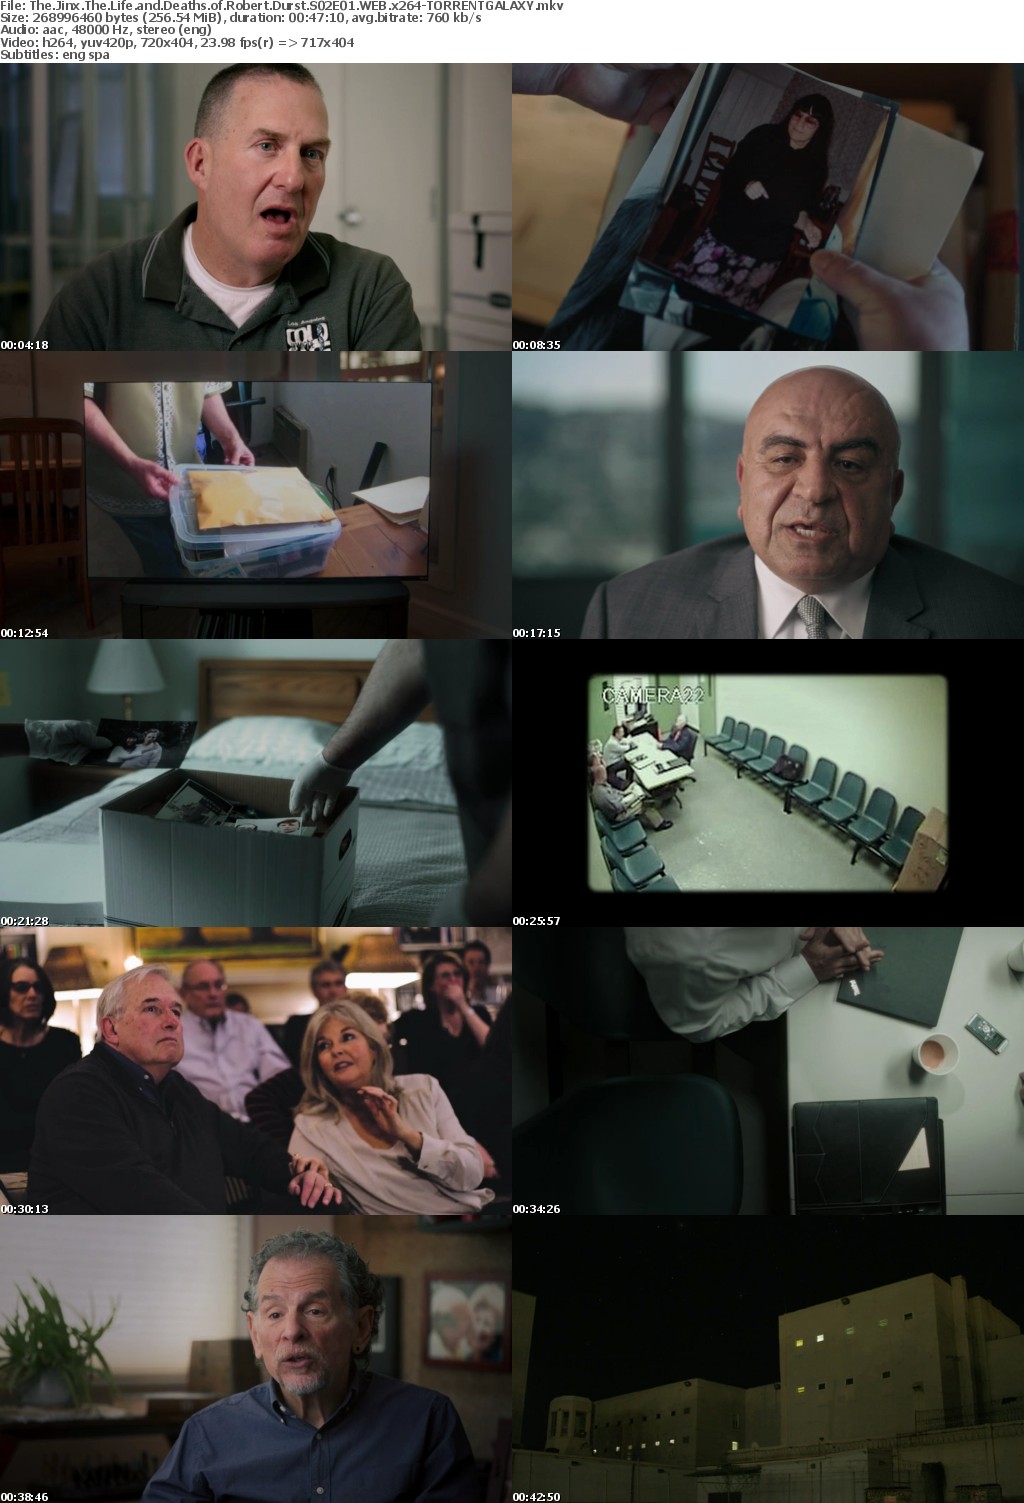 The Jinx The Life and Deaths of Robert Durst S02E01 WEB x264-GALAXY